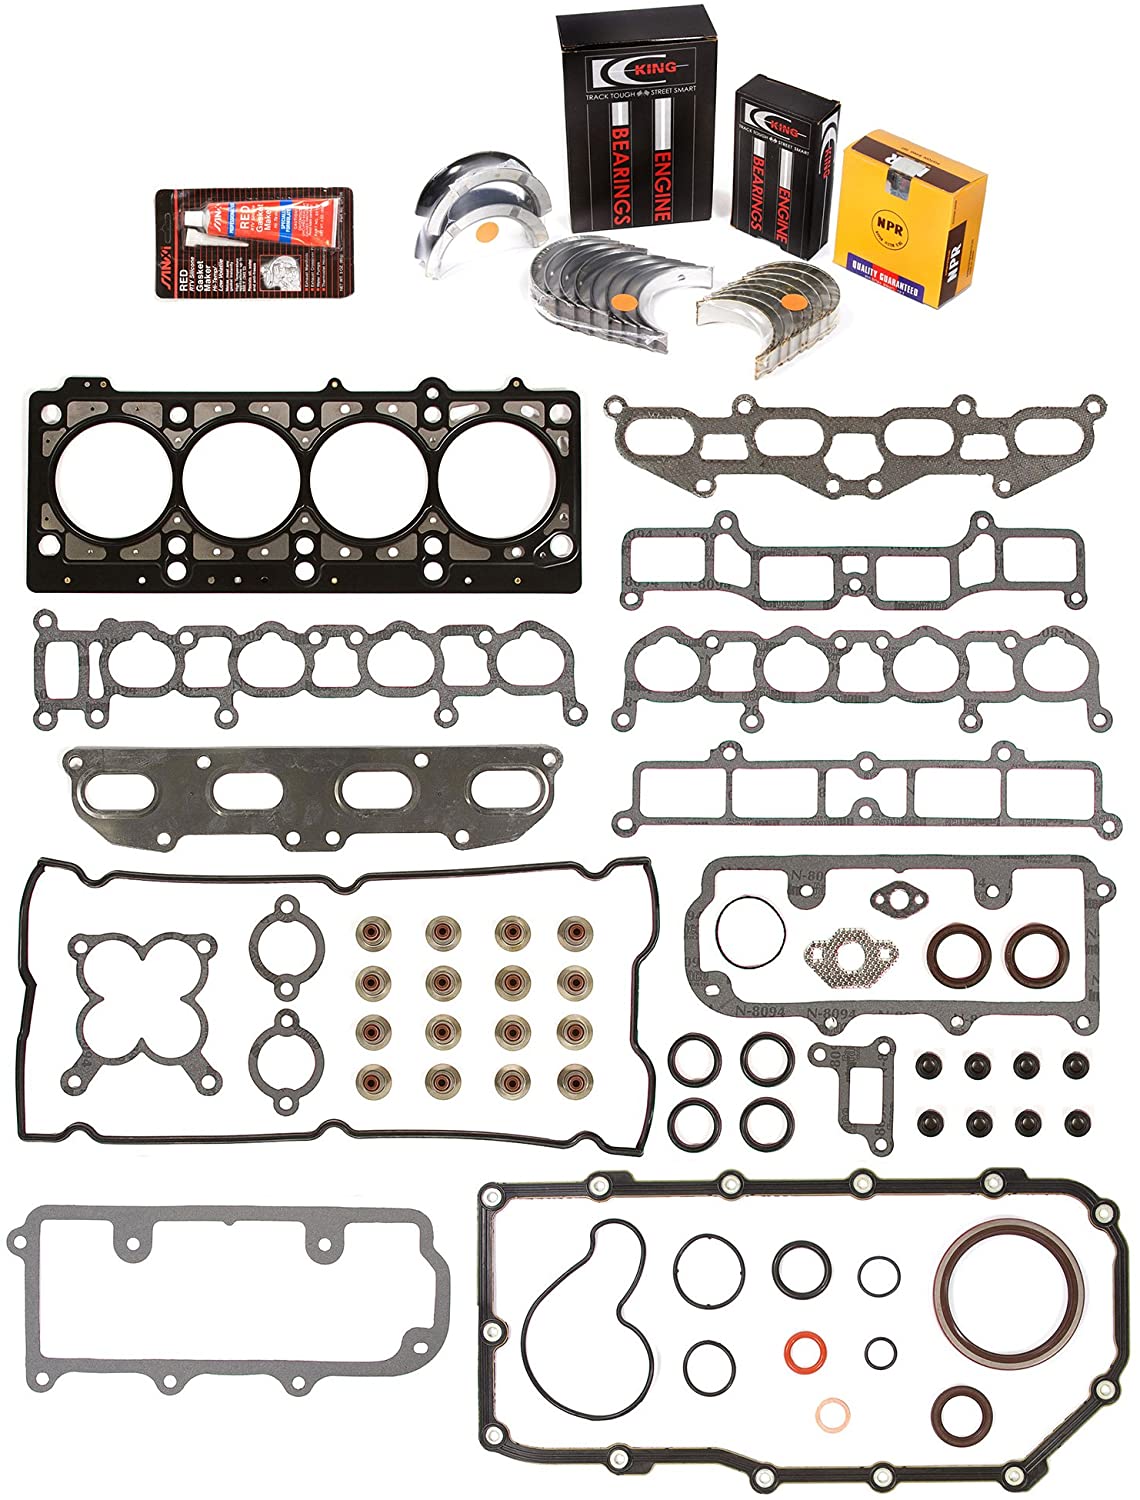 Evergreen Engine Rering Kit FSBRR5020EVE��� Compatible With 96-99 Mitsubishi Eagle Dodge Non-Turbo 2.0 420A Full Gasket Set, Standard Size Main Rod Bearings, Standard Size Piston Rings (Pistons Standard Main Standard | Rod Standard)